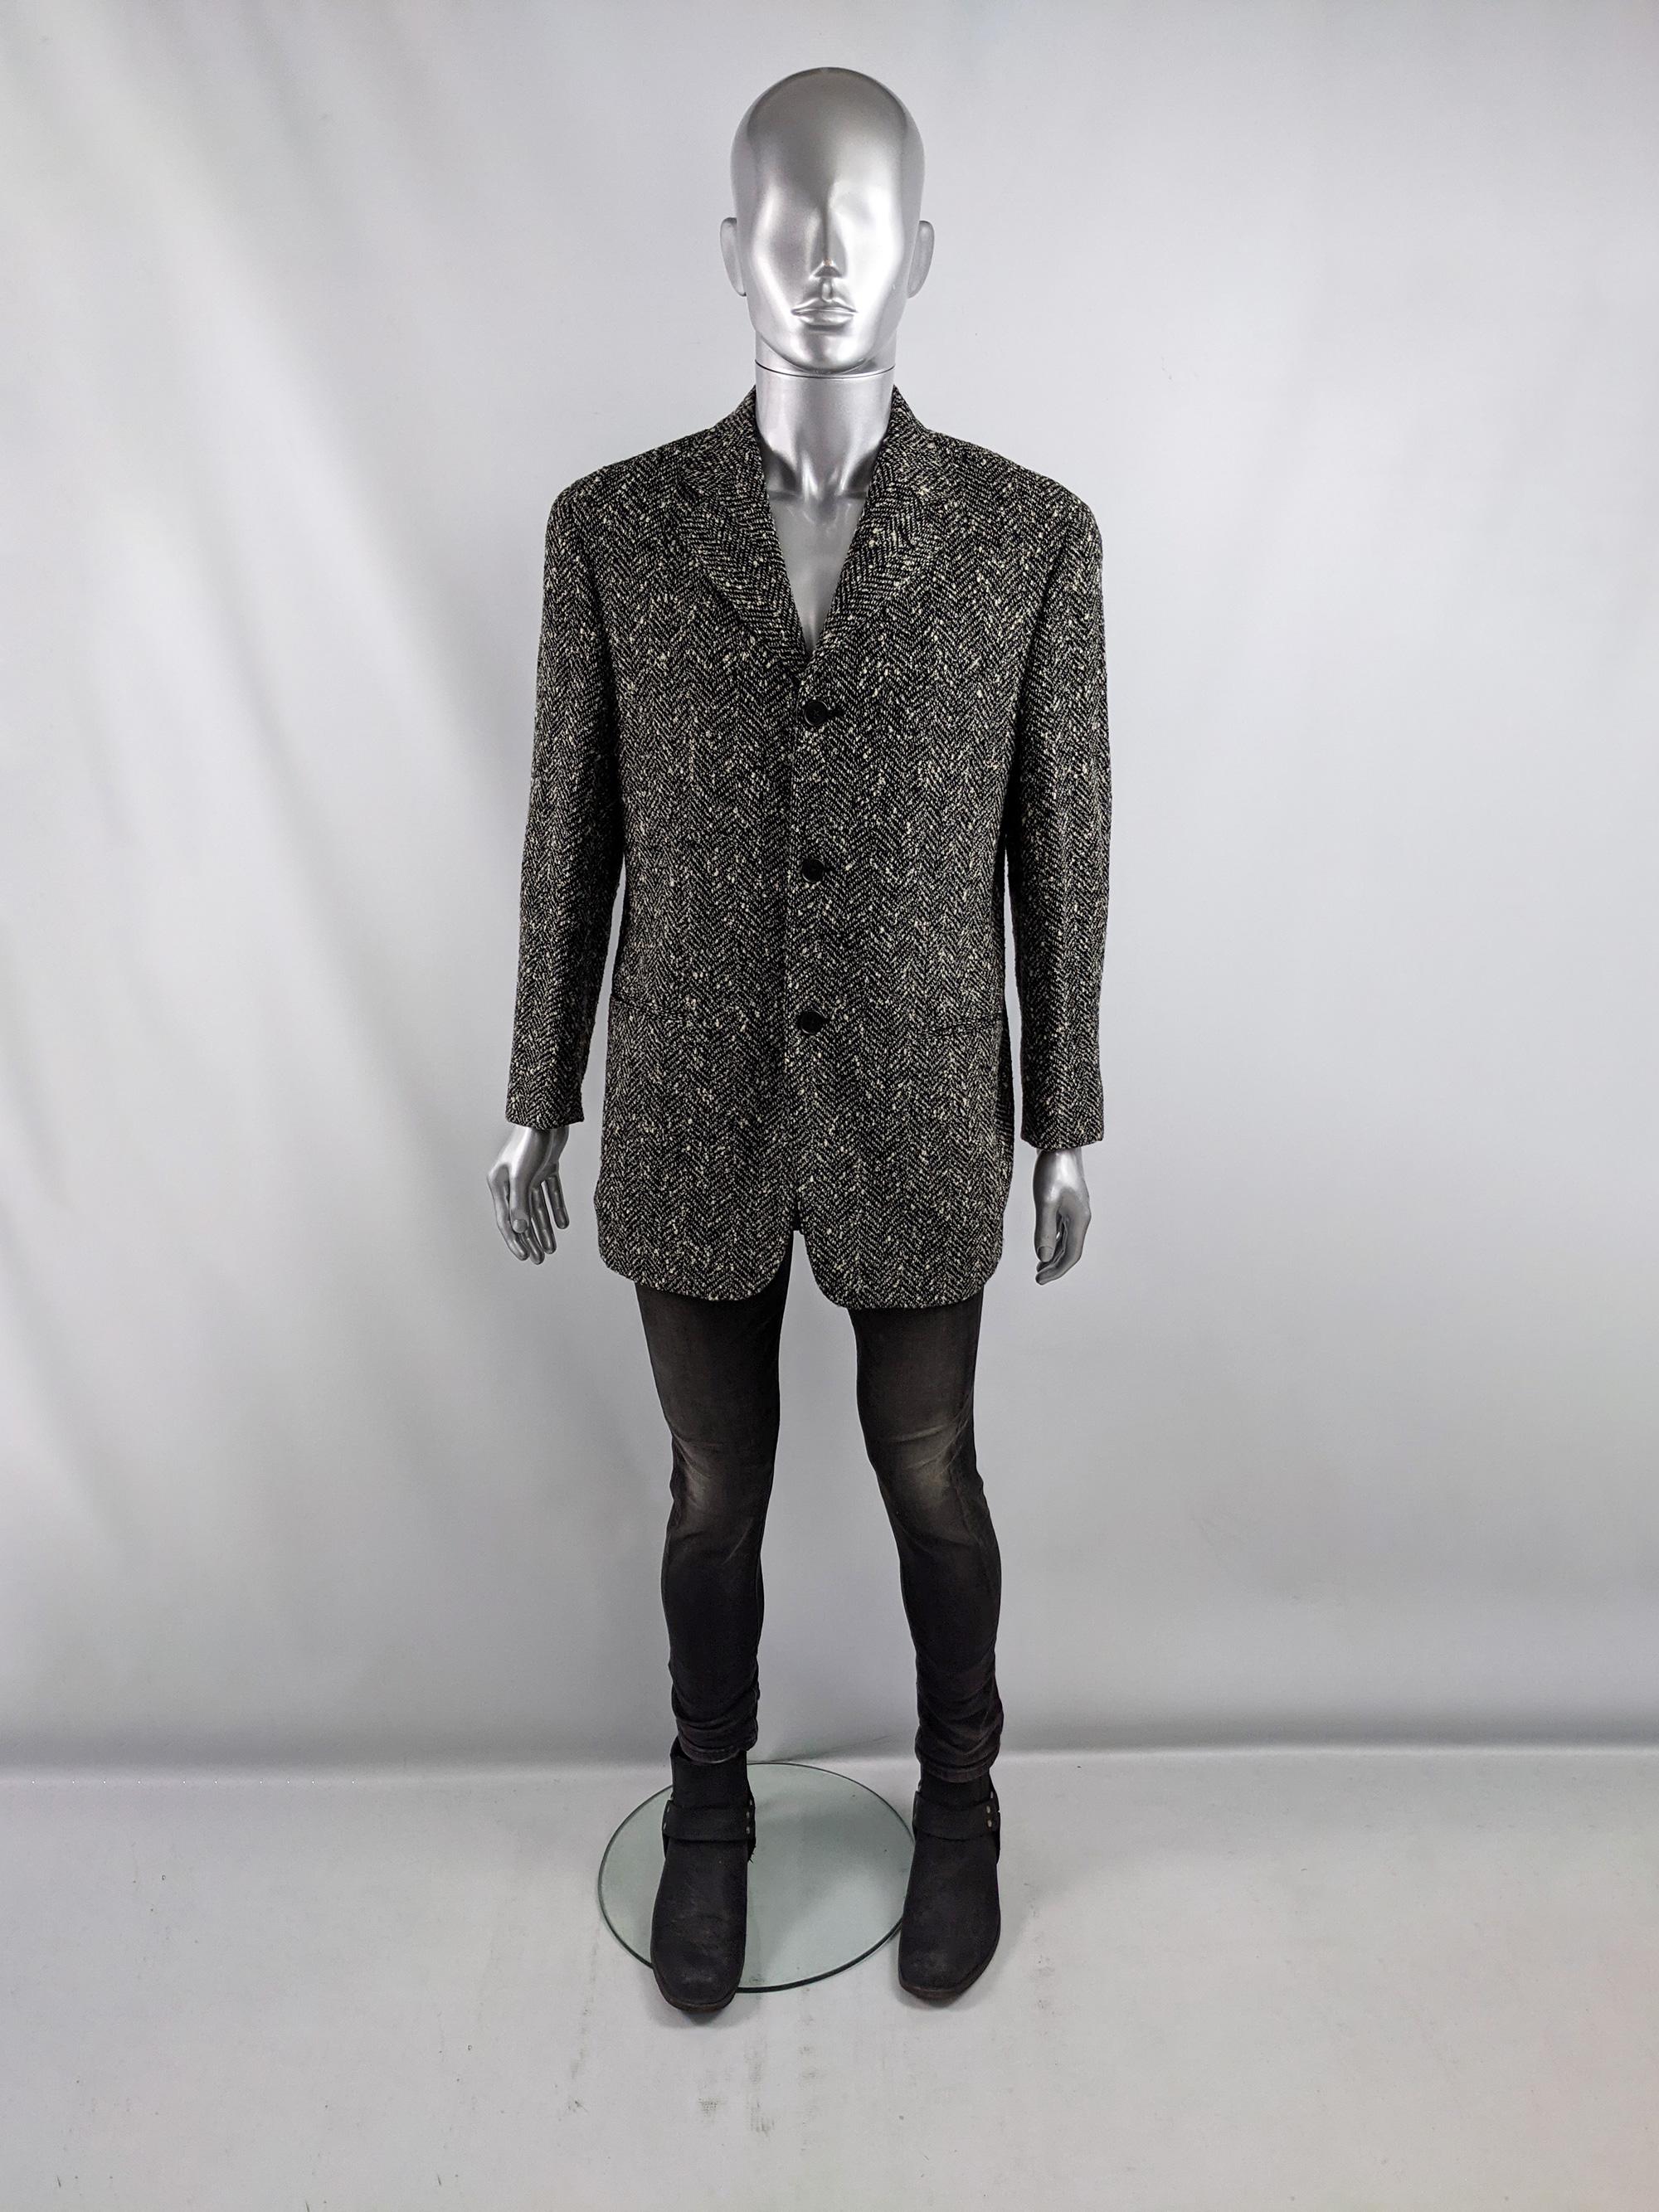 An excellent vintage tailored sport coat / blazer jacket from the 80s by Italian luxury brand, Pal Zileri. Made in Italy, from a black and white speckled tweed with a herringbone pattern throughout. It fastens up the front with single breasted